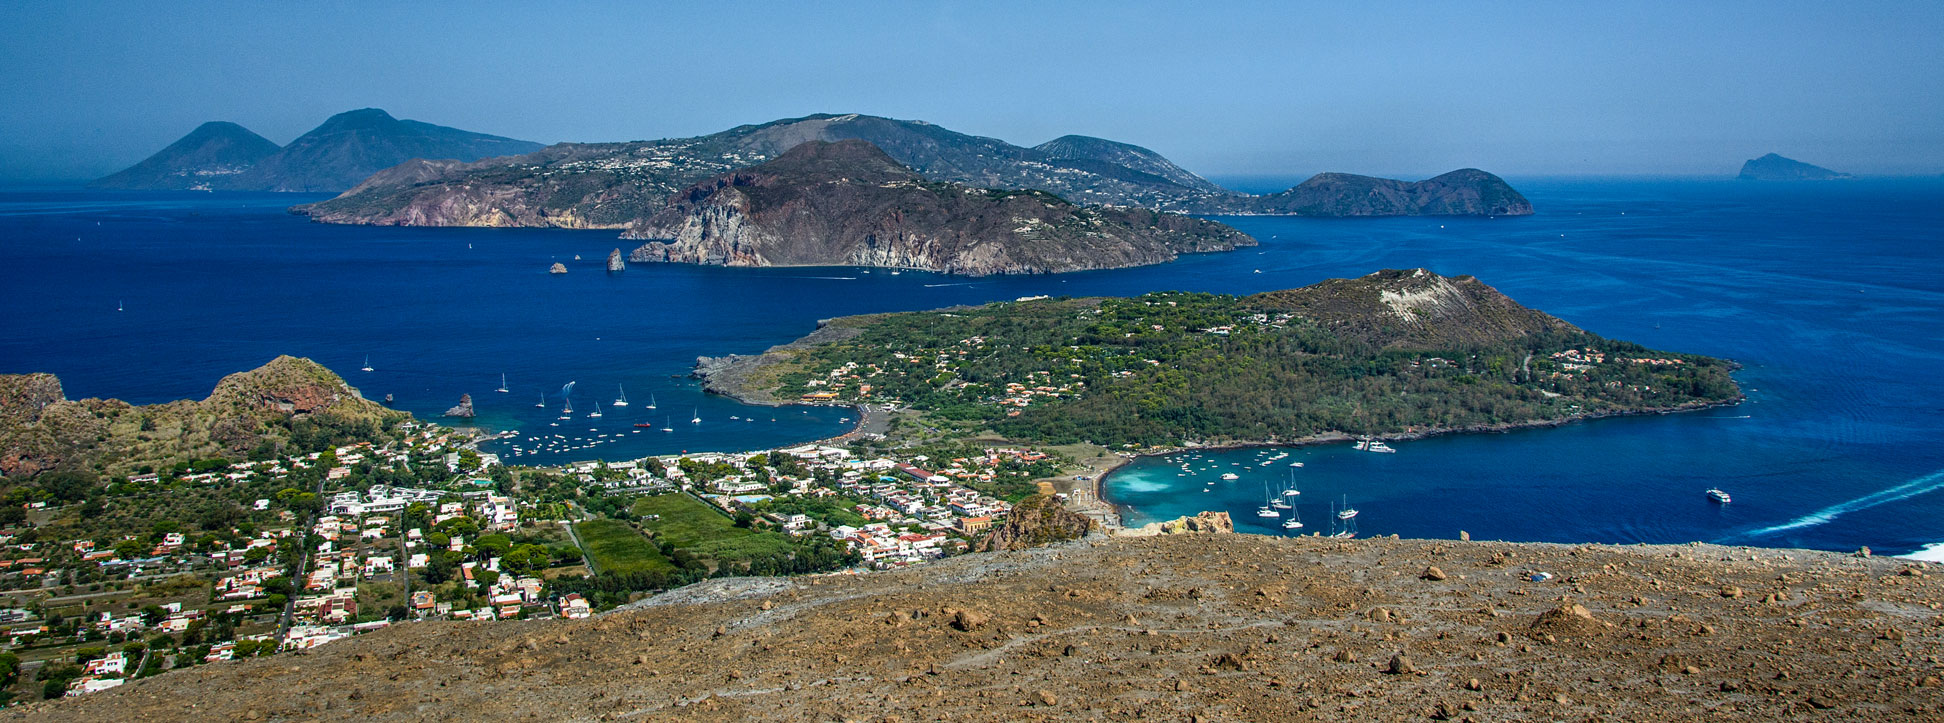 View from Vulcano Island to the other Aeolian Islands, an volcanic archipelago north of Sicily